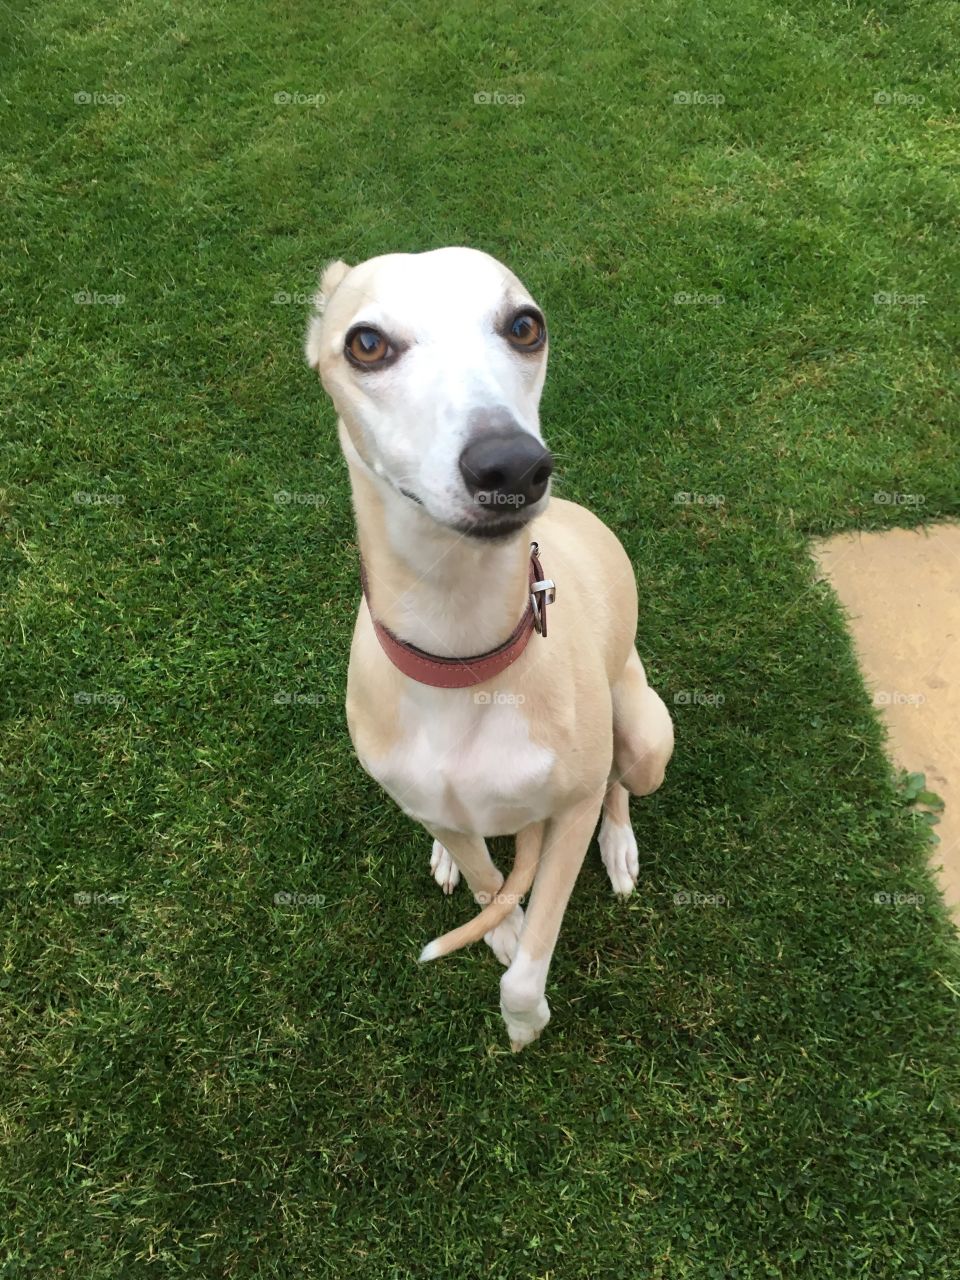 Hennie the whippet, sitting and giving a paw on the lawn in the garden outside